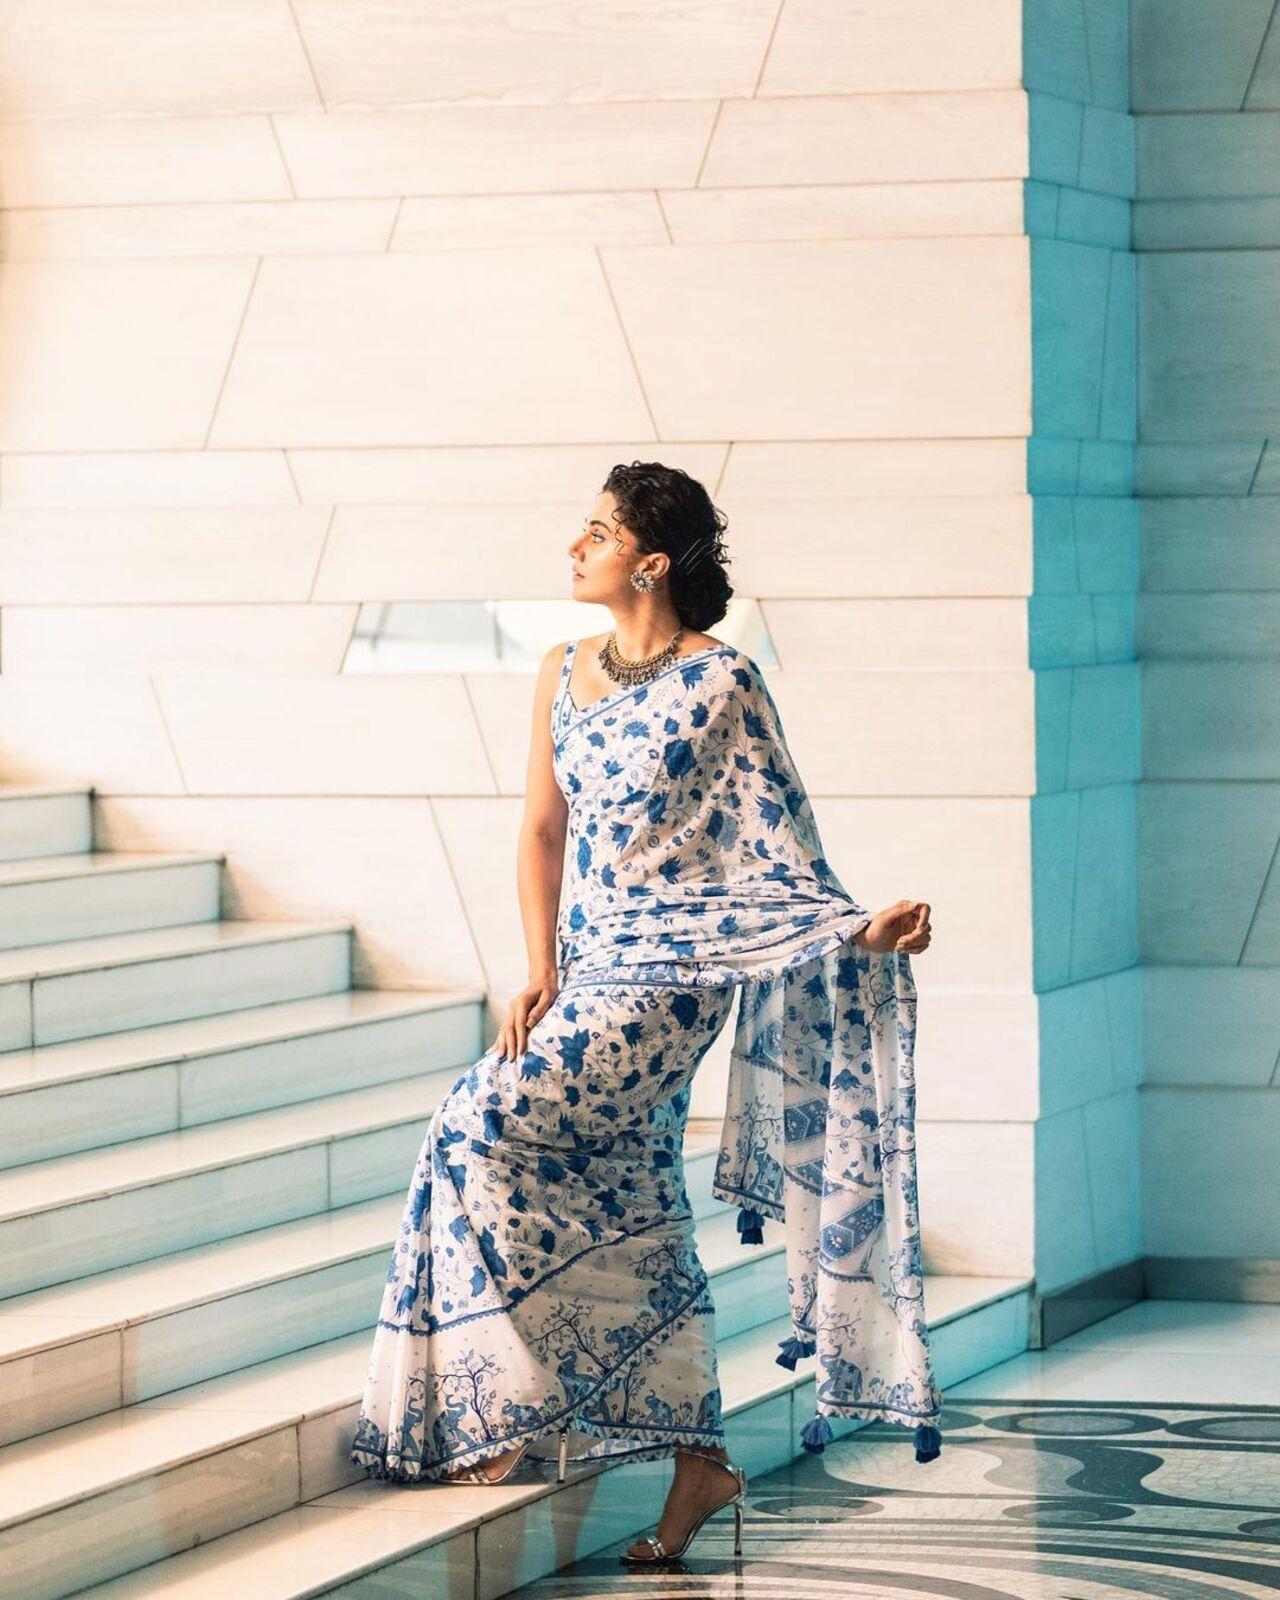 It seems like Taapsee has a soft spot for white as she frequently wears printed sarees with white as the base colour